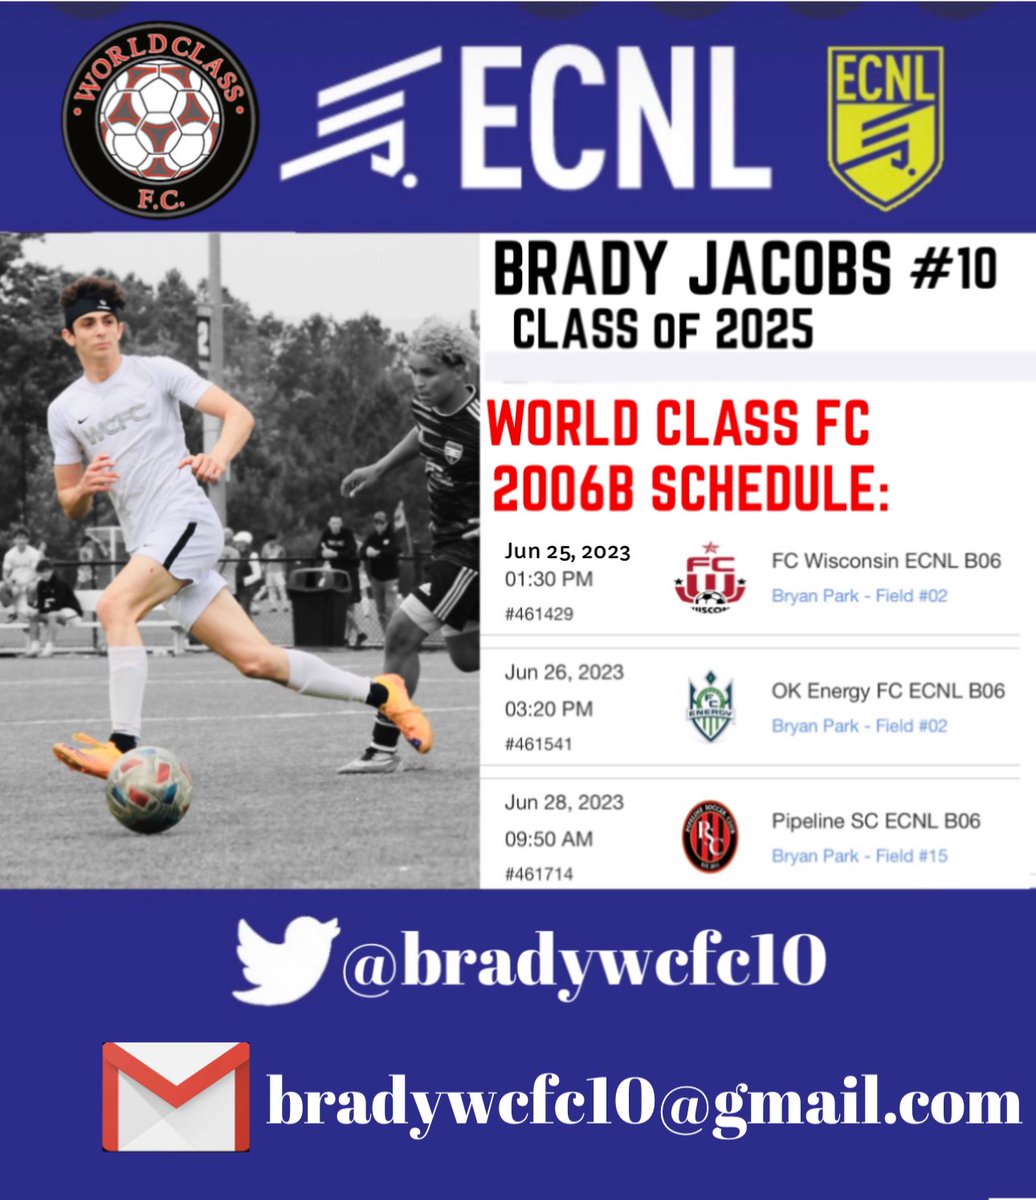 Big weekend ahead…ECNL U17 Playoffs down in Greensboro, NC. Looking forward to playing some great competition. Vamos, World Class!! @WorldClassFC1 @ECNLboys @TopDrawerSoccer @NcsaSoccer @ncsa @ImCollegeSoccer